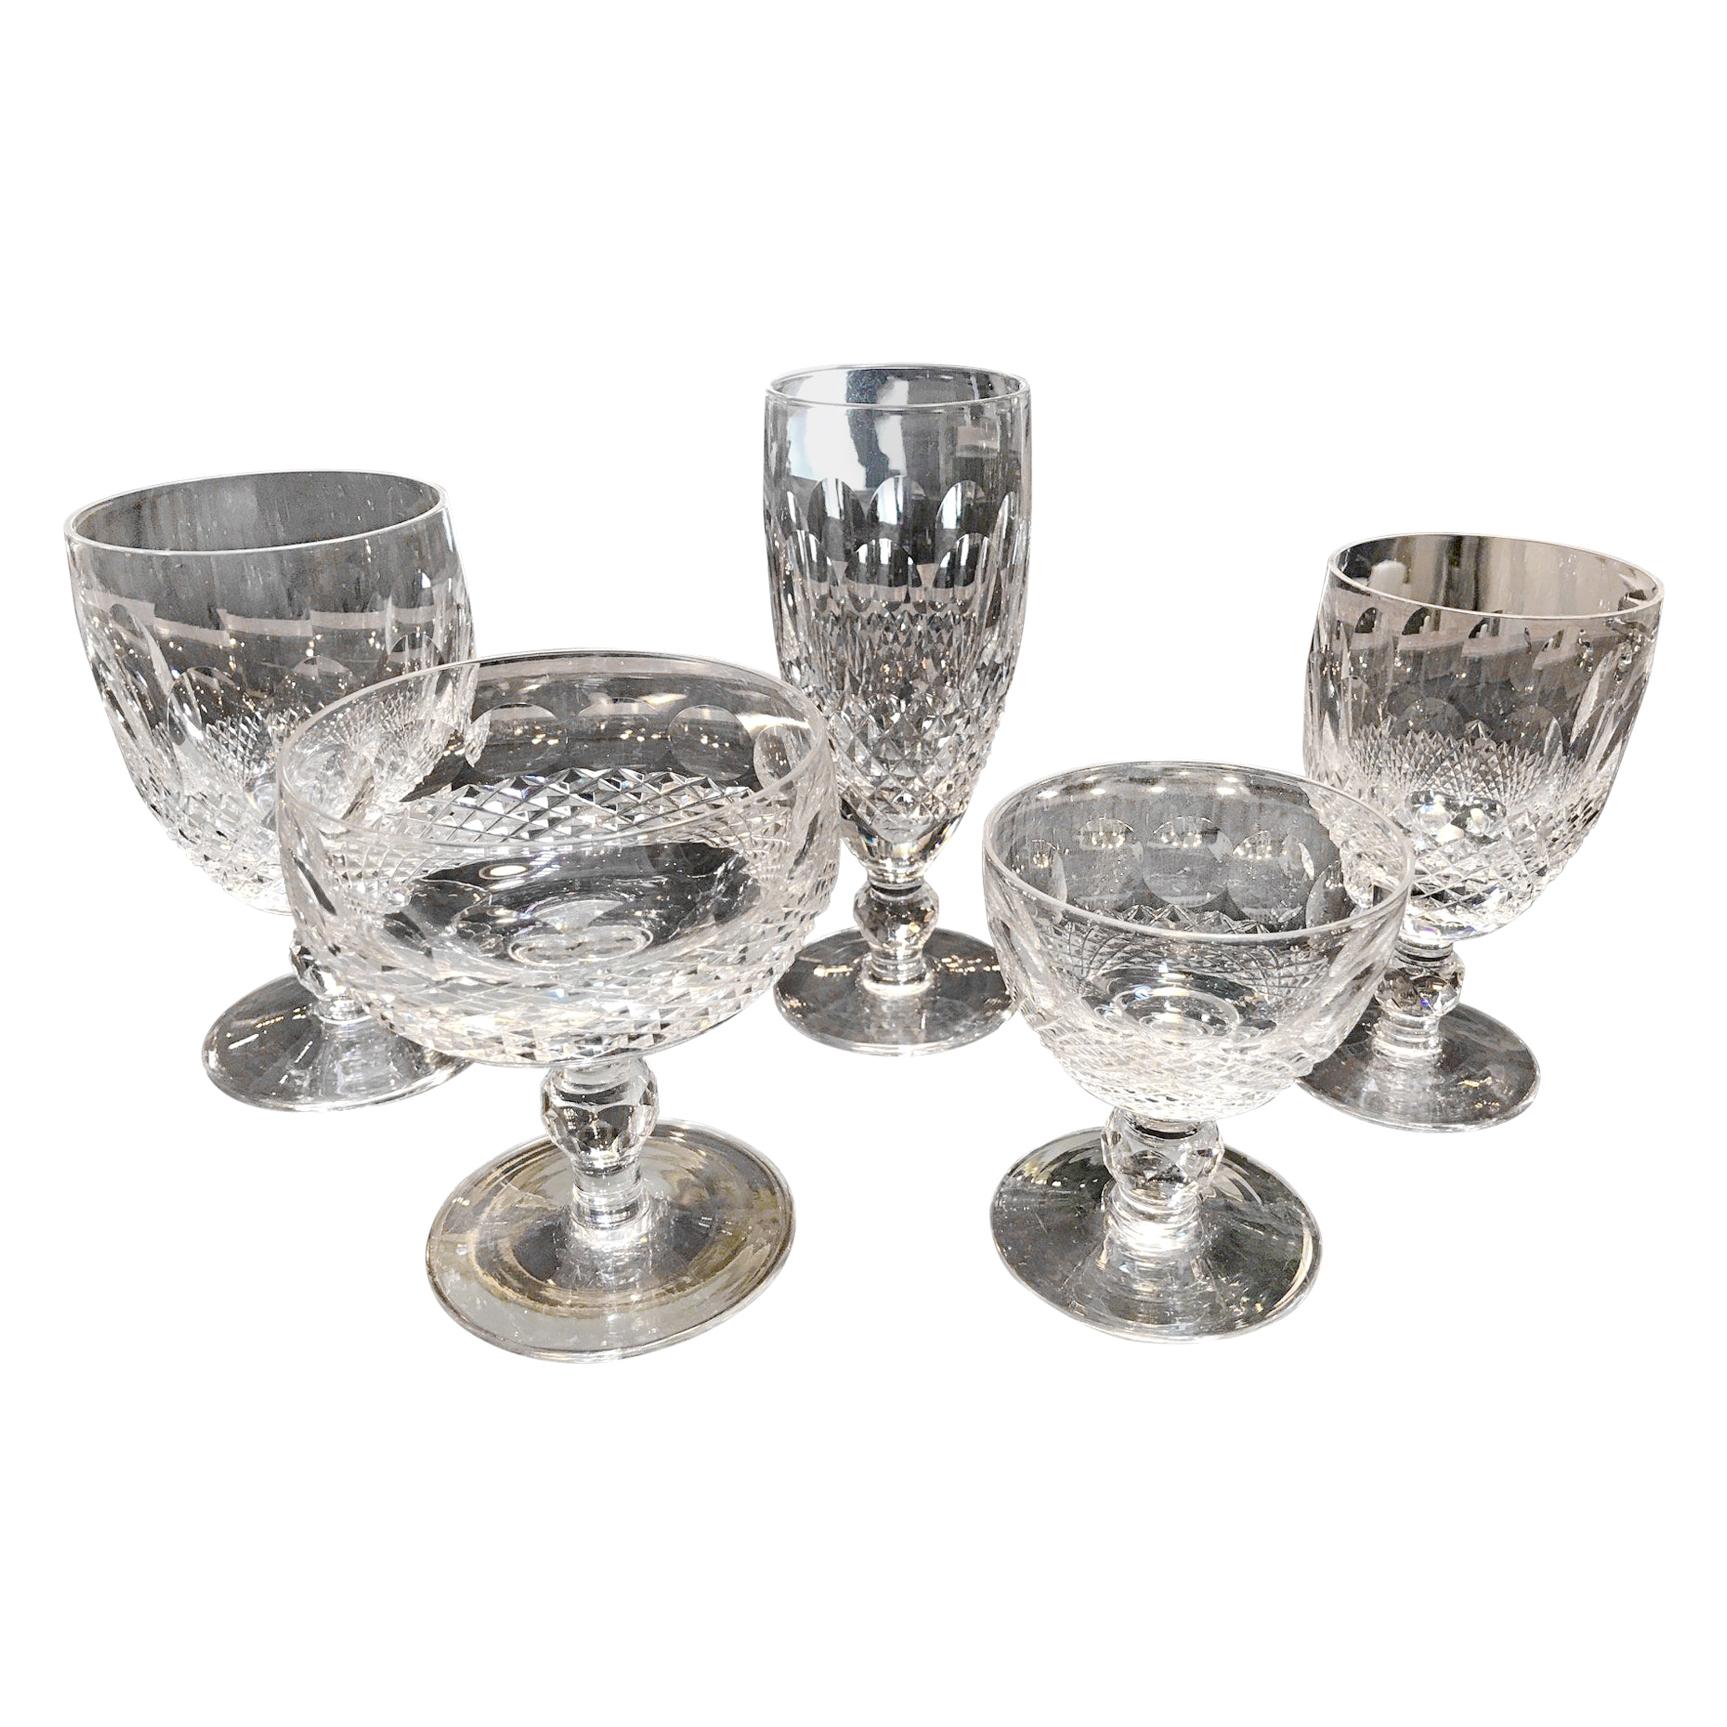 60 Piece Set of Handcut Irish Crystal Stemware by Waterford Colleen 60